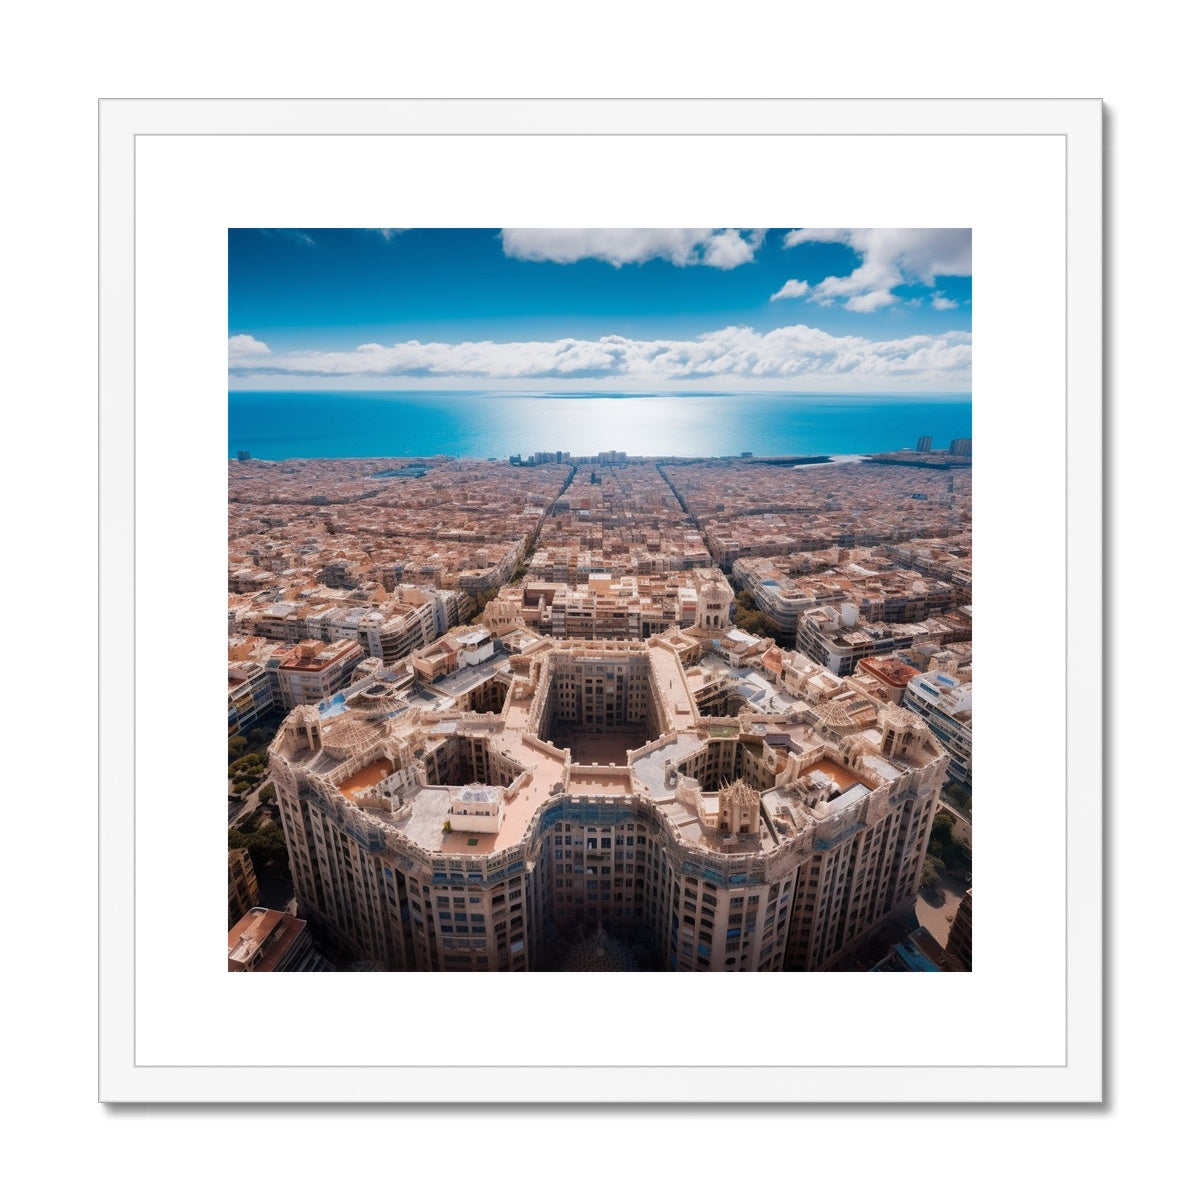 Barcelona Architecture From The Sky  Framed & Mounted Print